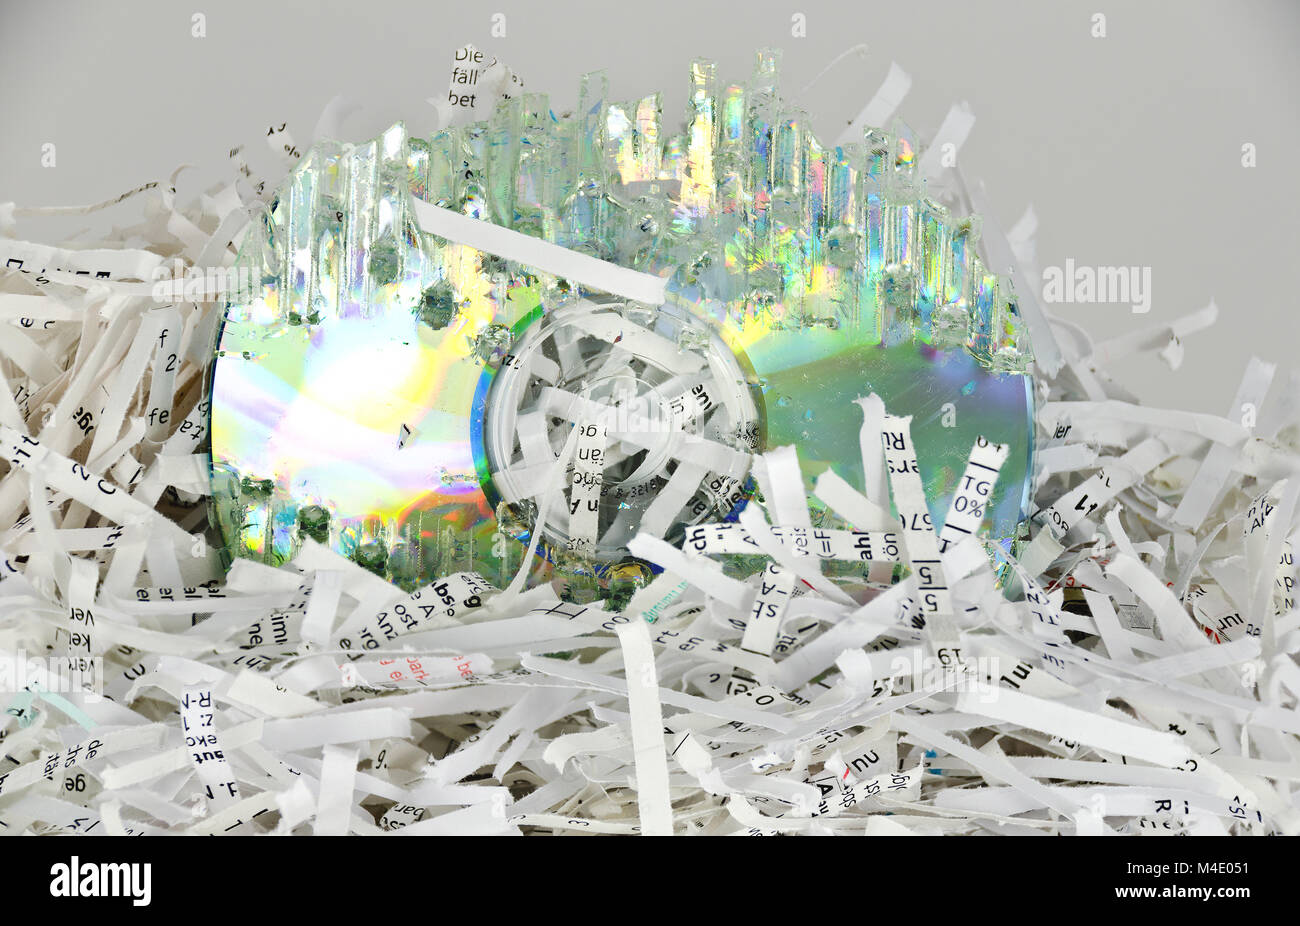 stripes of shredded papers and a destroyed data disc Stock Photo